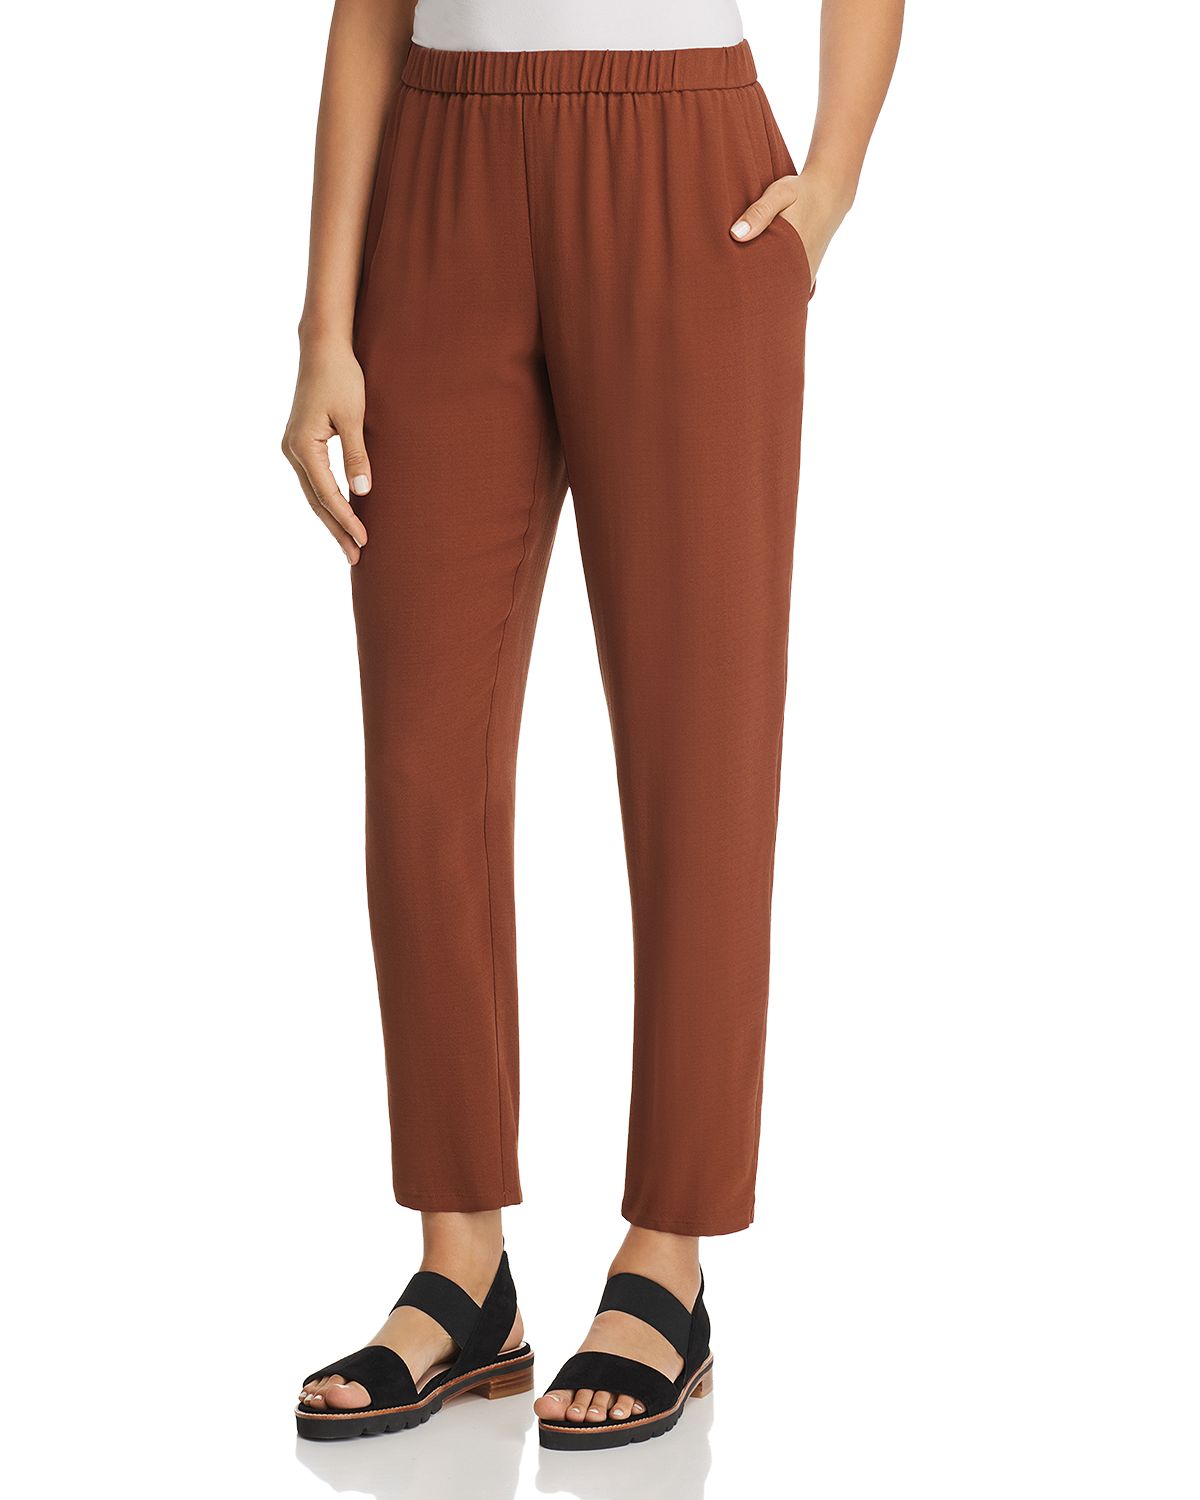 NEW EILEEN FISHER NUTMEG SILK GEORGETTE CREPE SLOUCHY ANKLE PANTS L ...